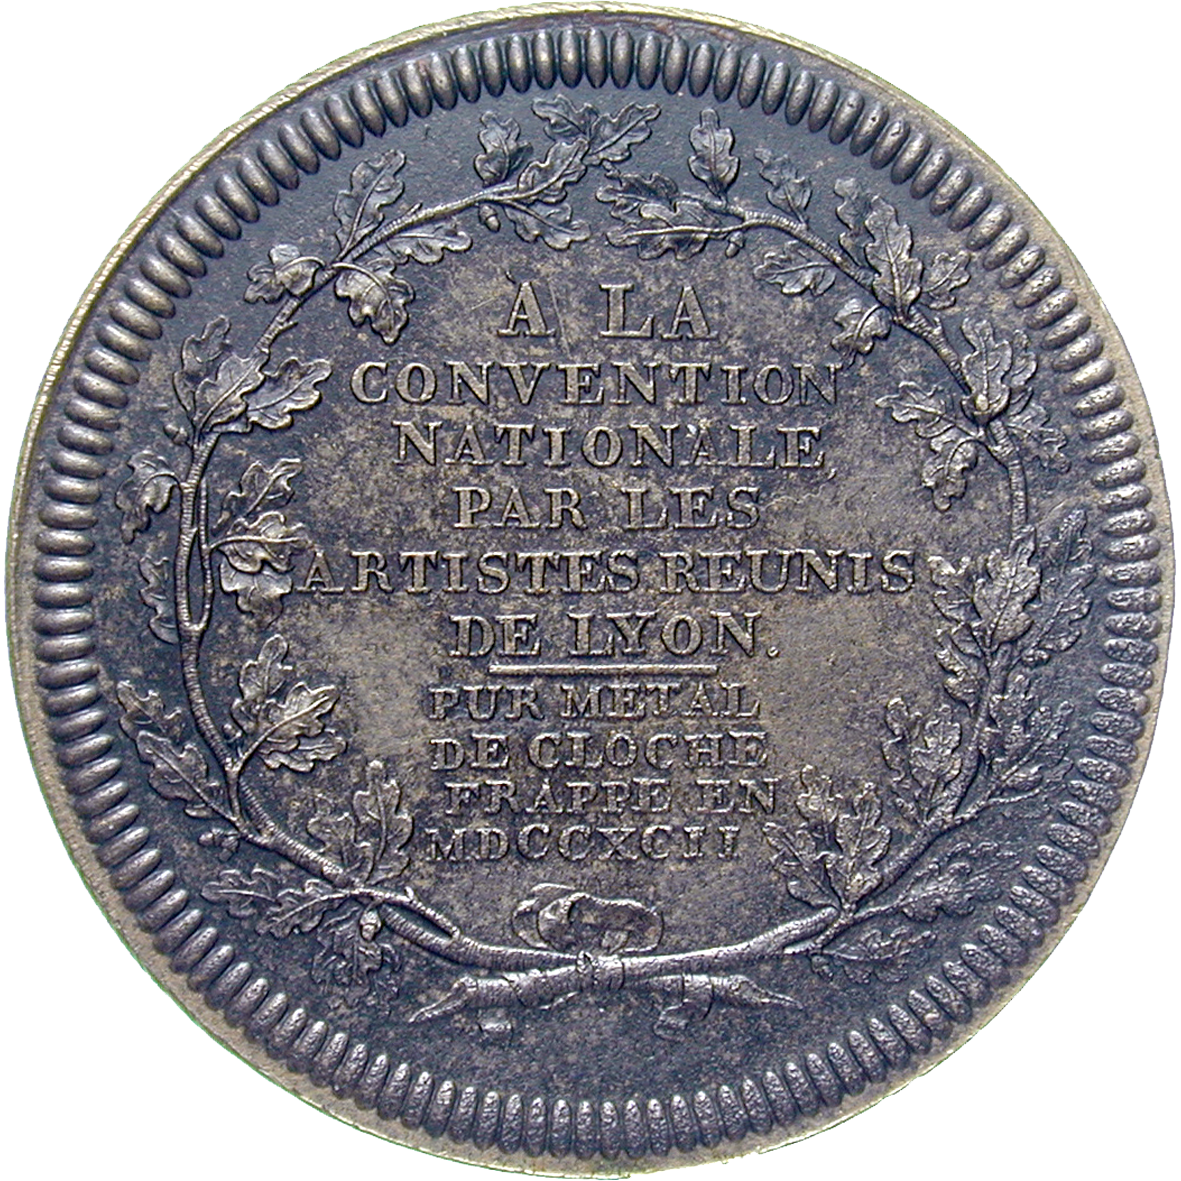 Republic of France, National Convention, Pattern coin, Year 1 of the Republic (reverse)